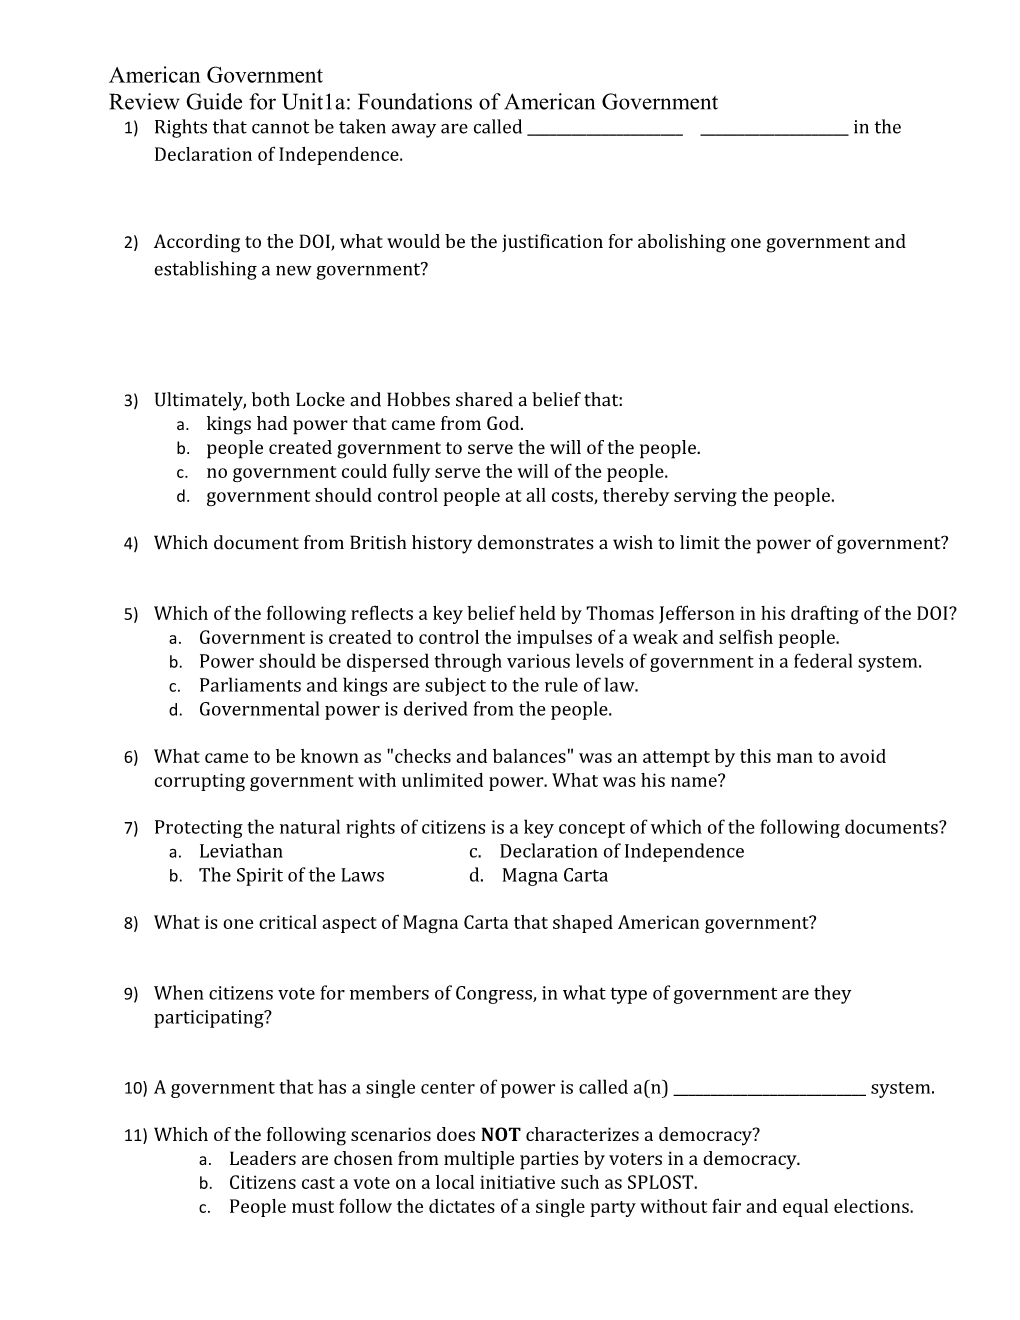 Review Guide for Unit1a: Foundations of American Government